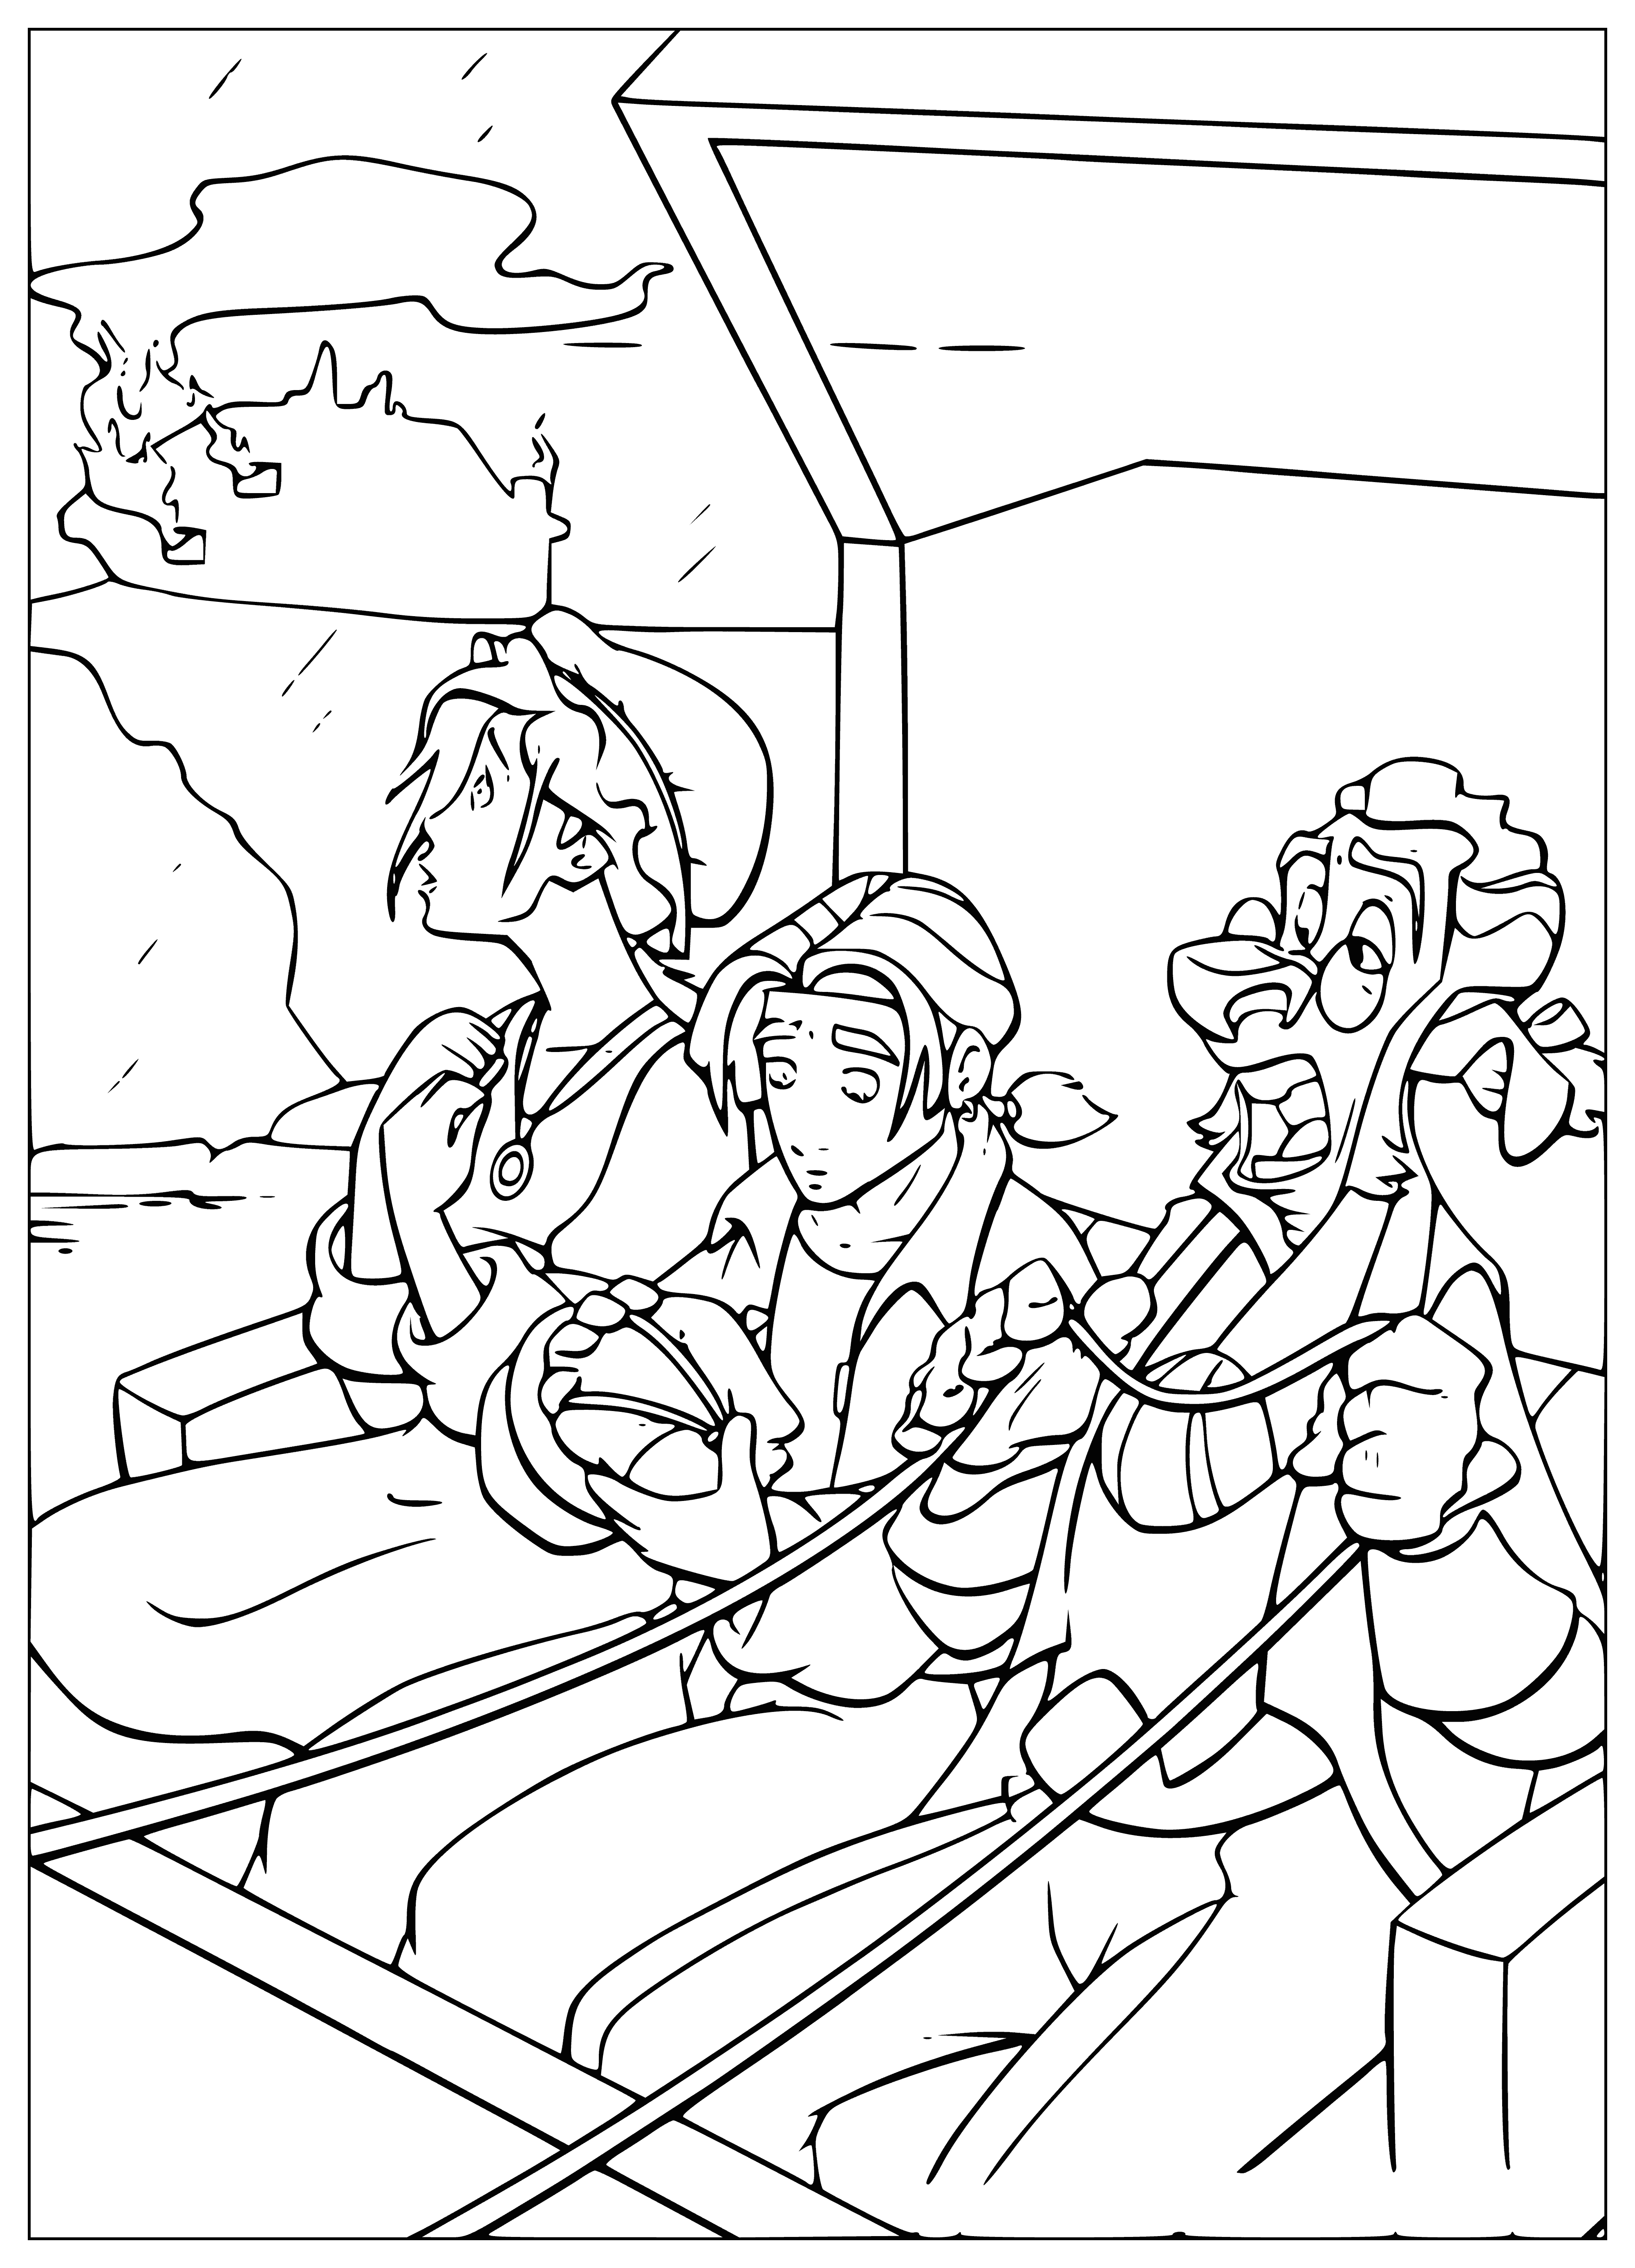 coloring page: Tavern of Treasure Planet offers dreariness, fire, windows, dirt floor, and a back room. Rats scurry around as adventurers enter.